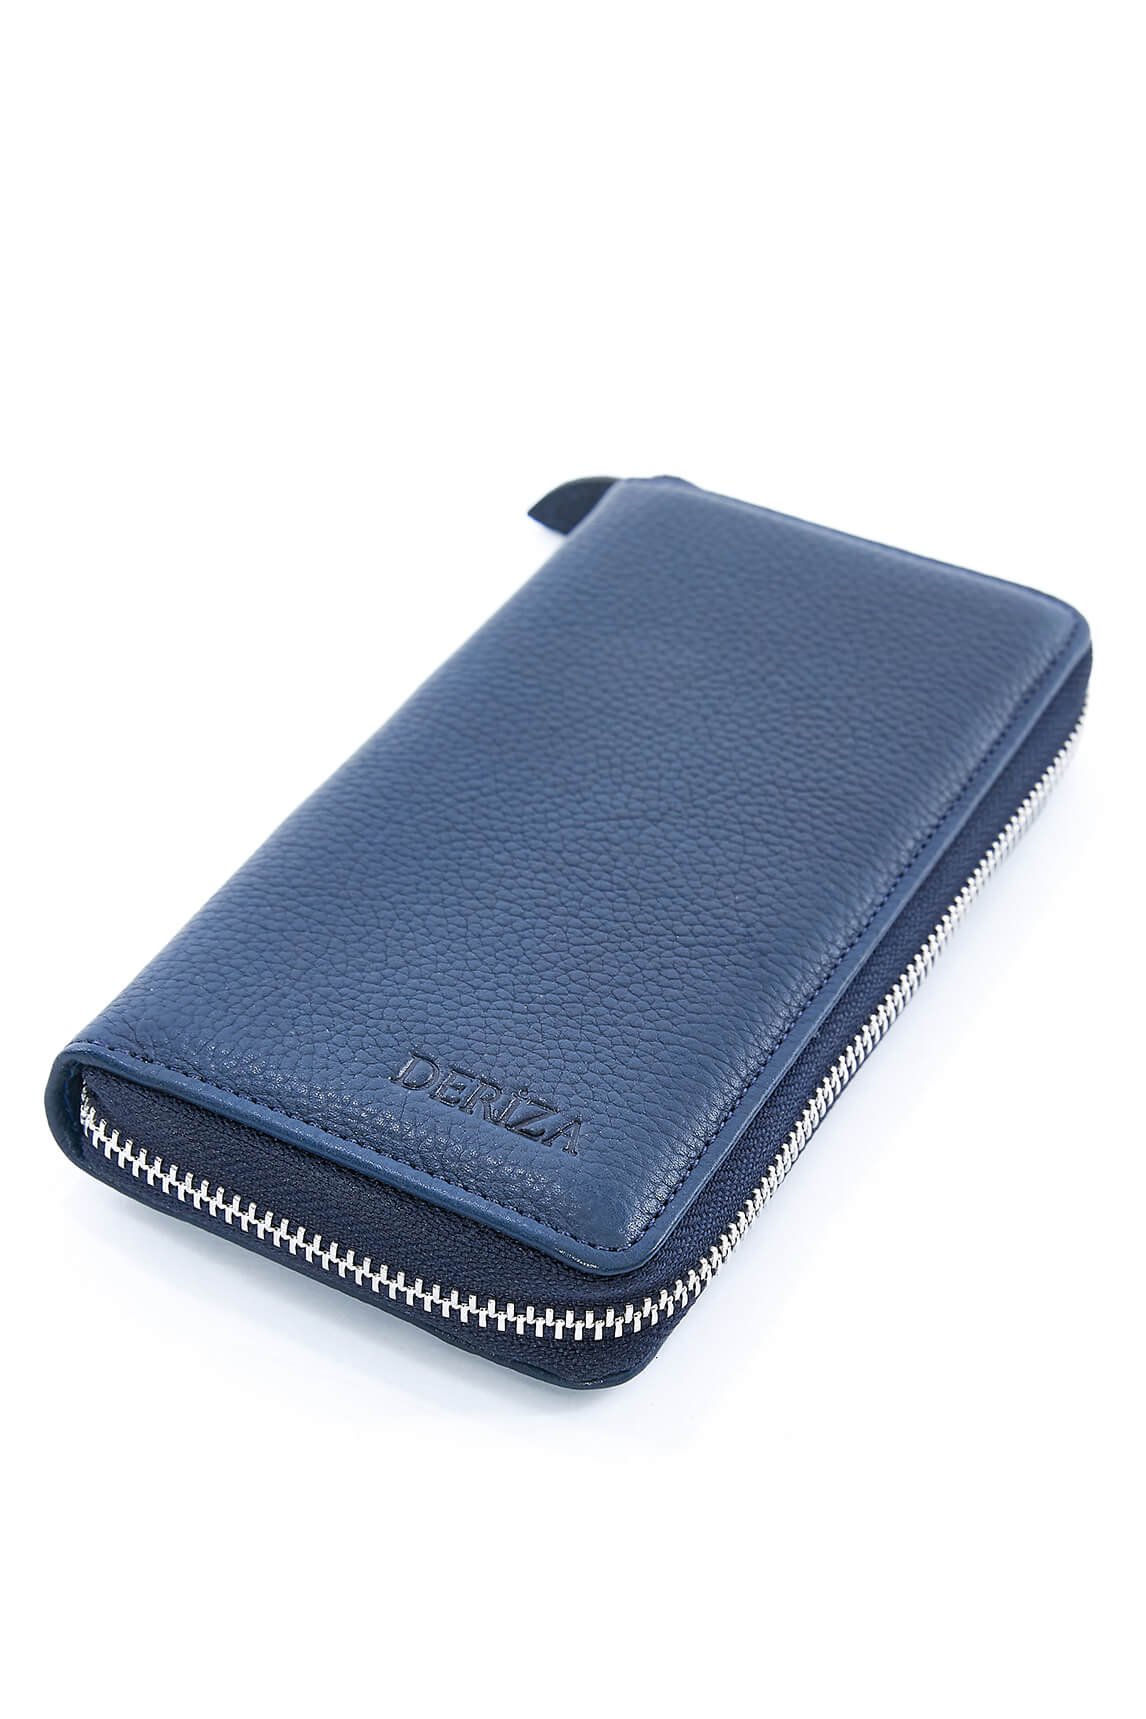 Genuine Leather Wallet with Phone Compartment Navy Blue